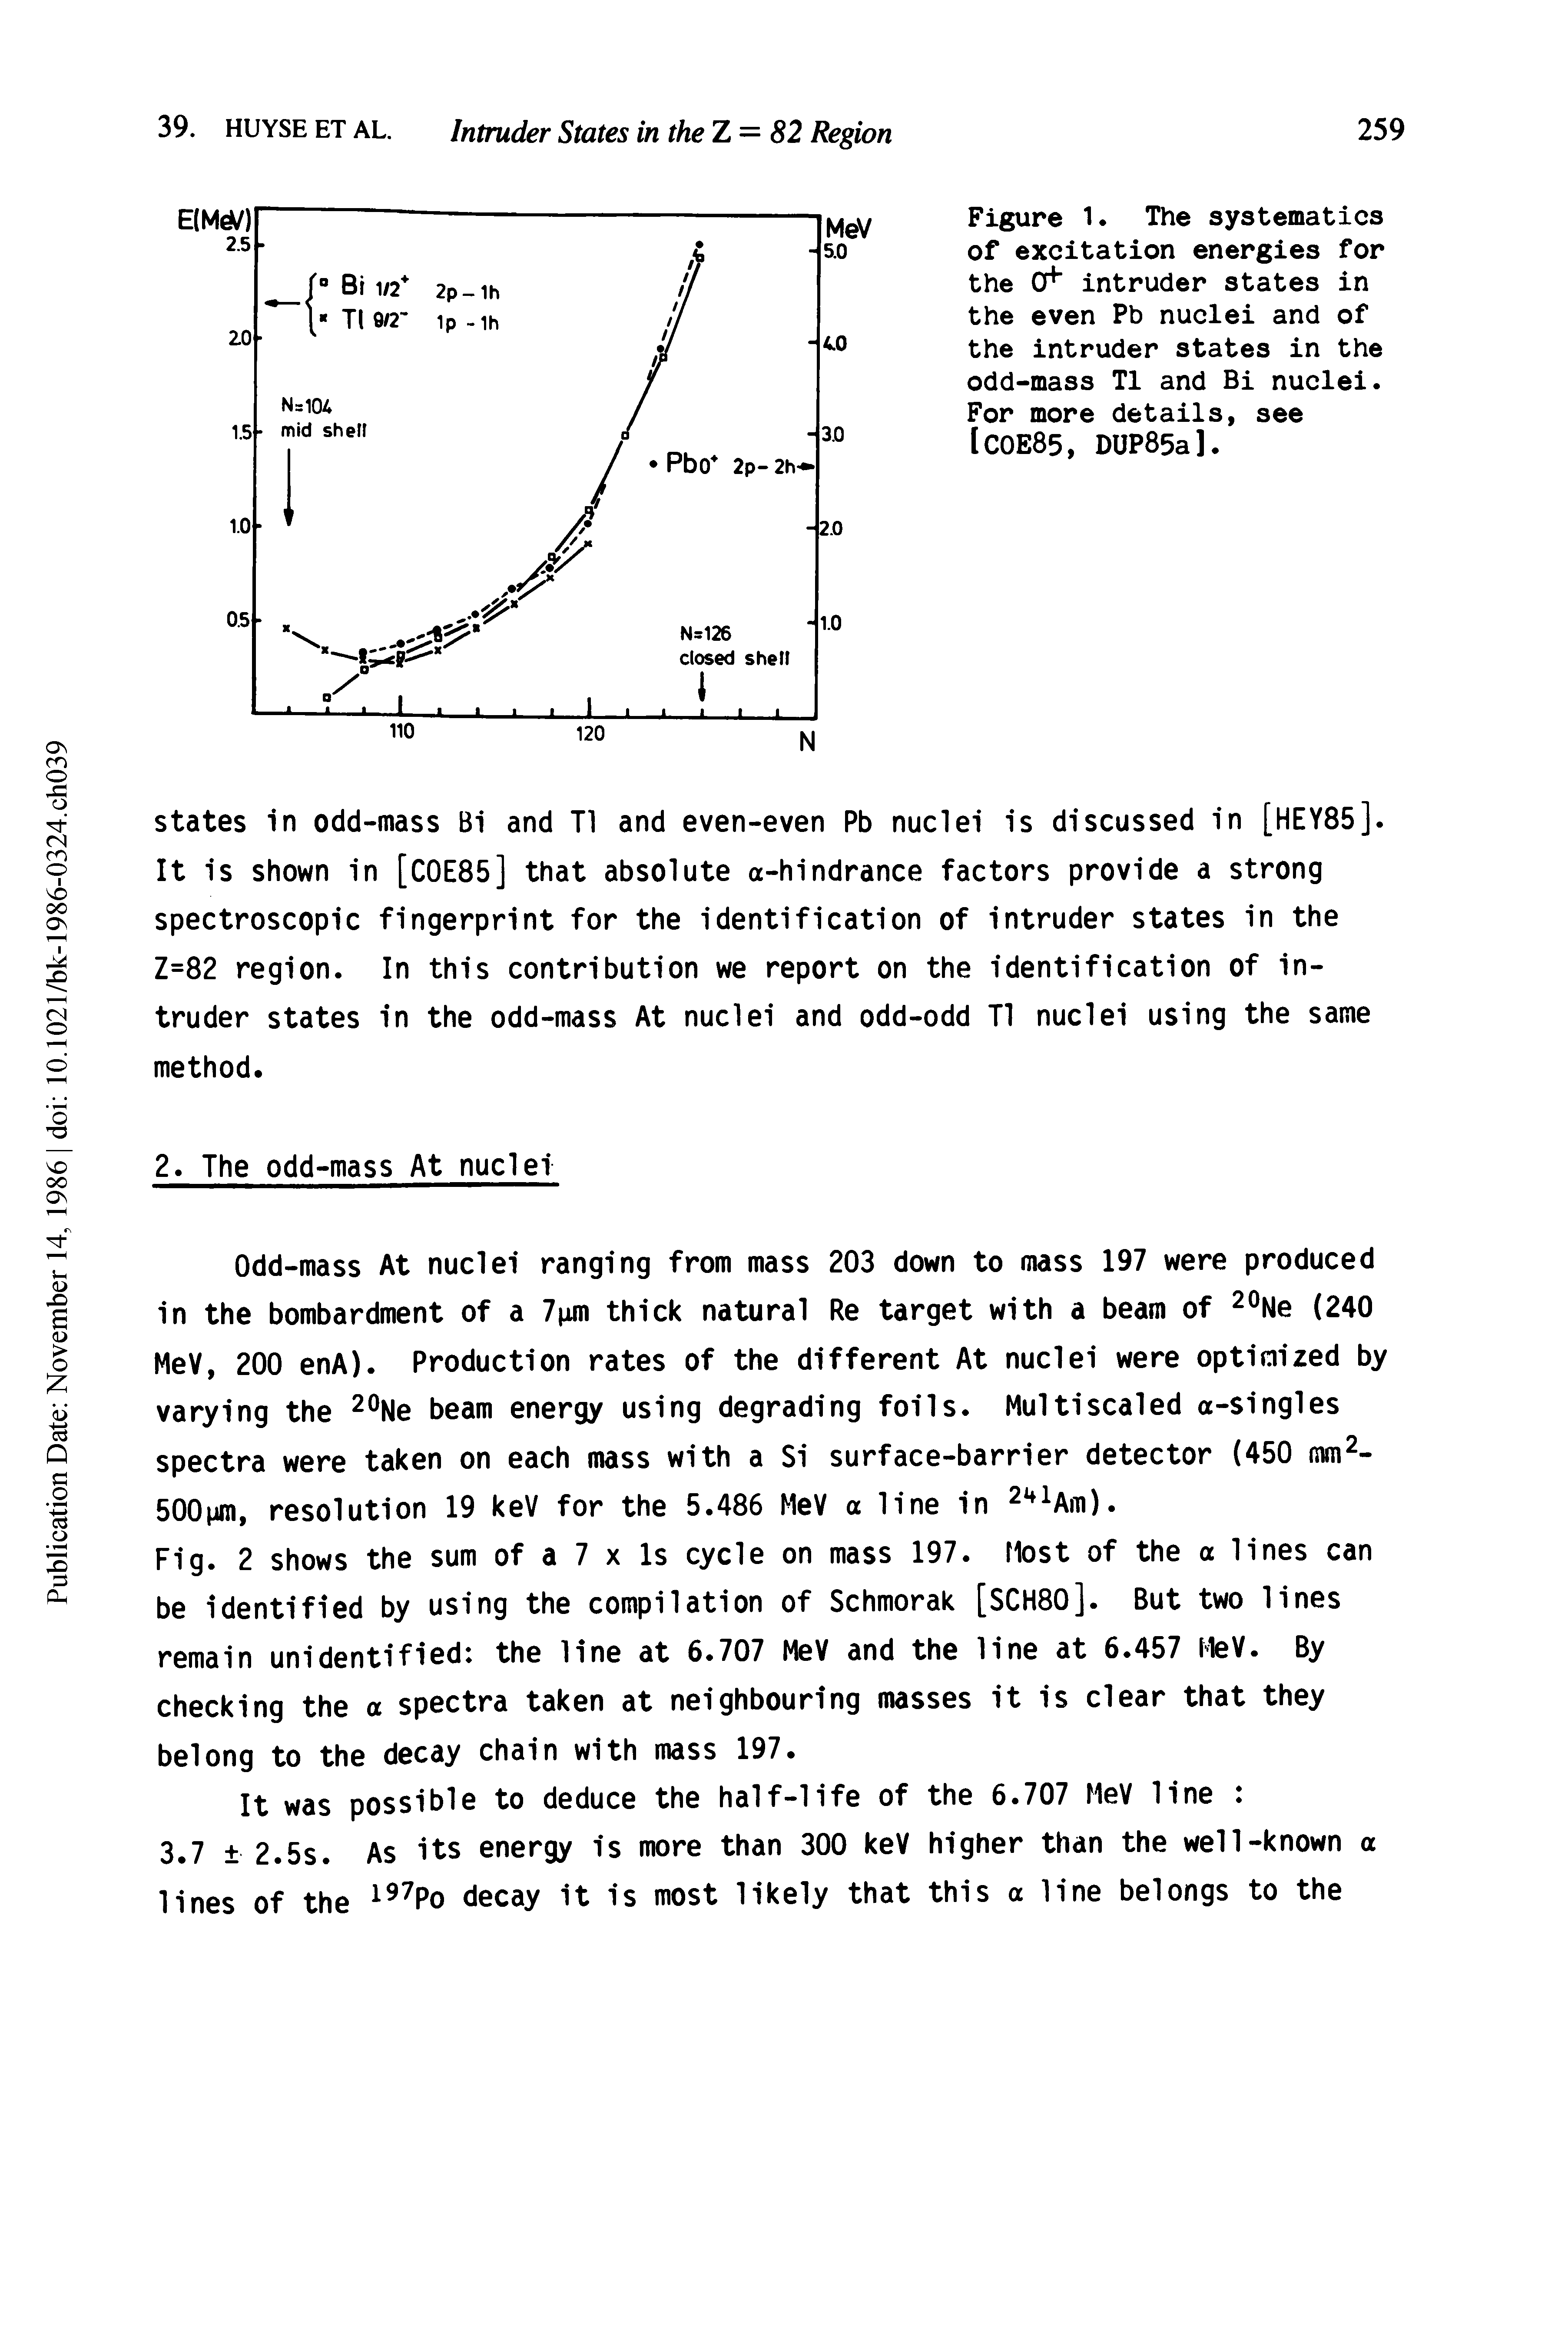 Figure 1. The systematics of excitation energies for the CT " intruder states in the even Pb nuclei and of the intruder states in the odd-mass T1 and Bi nuclei. For more details, see IC0E85, DUP85a].